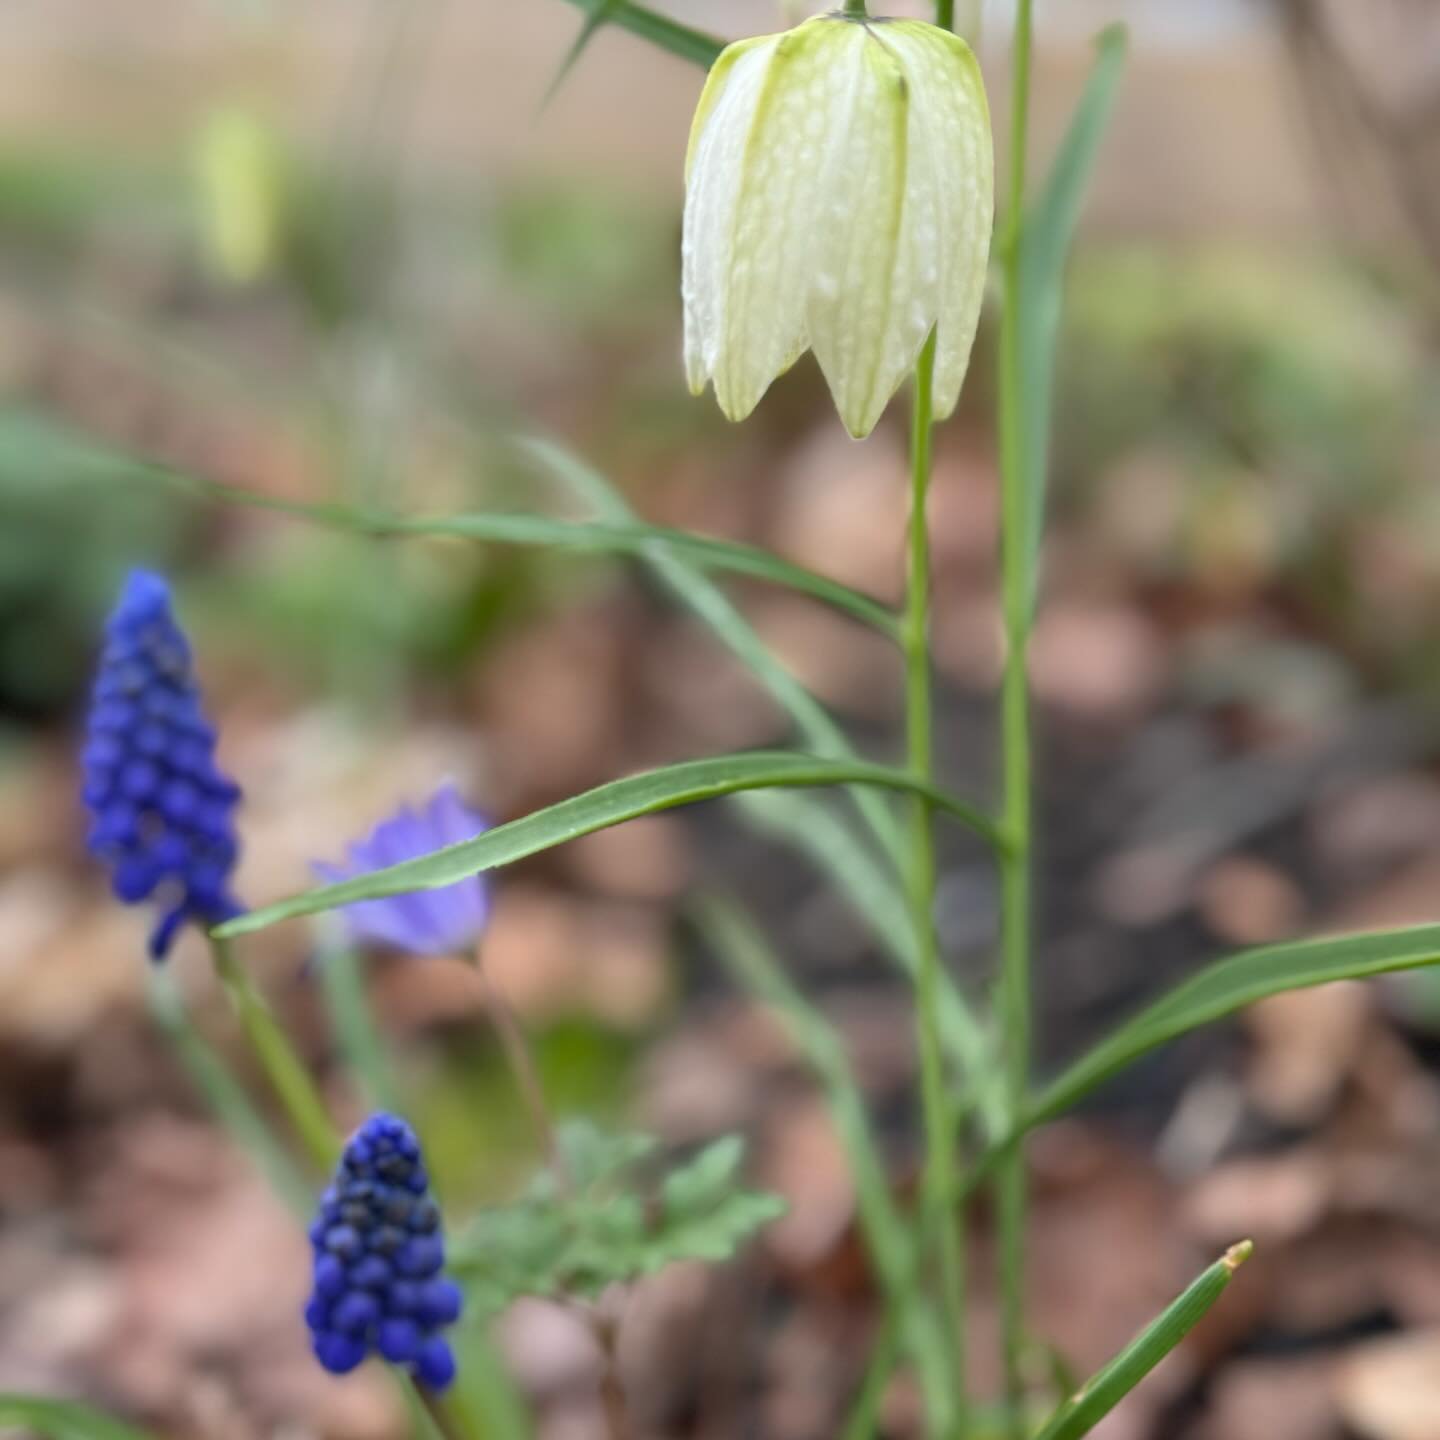 More signs of spring from this weekend:

Fritillarias, Variegated Sedges, Trout Lilies, and Hellebores!